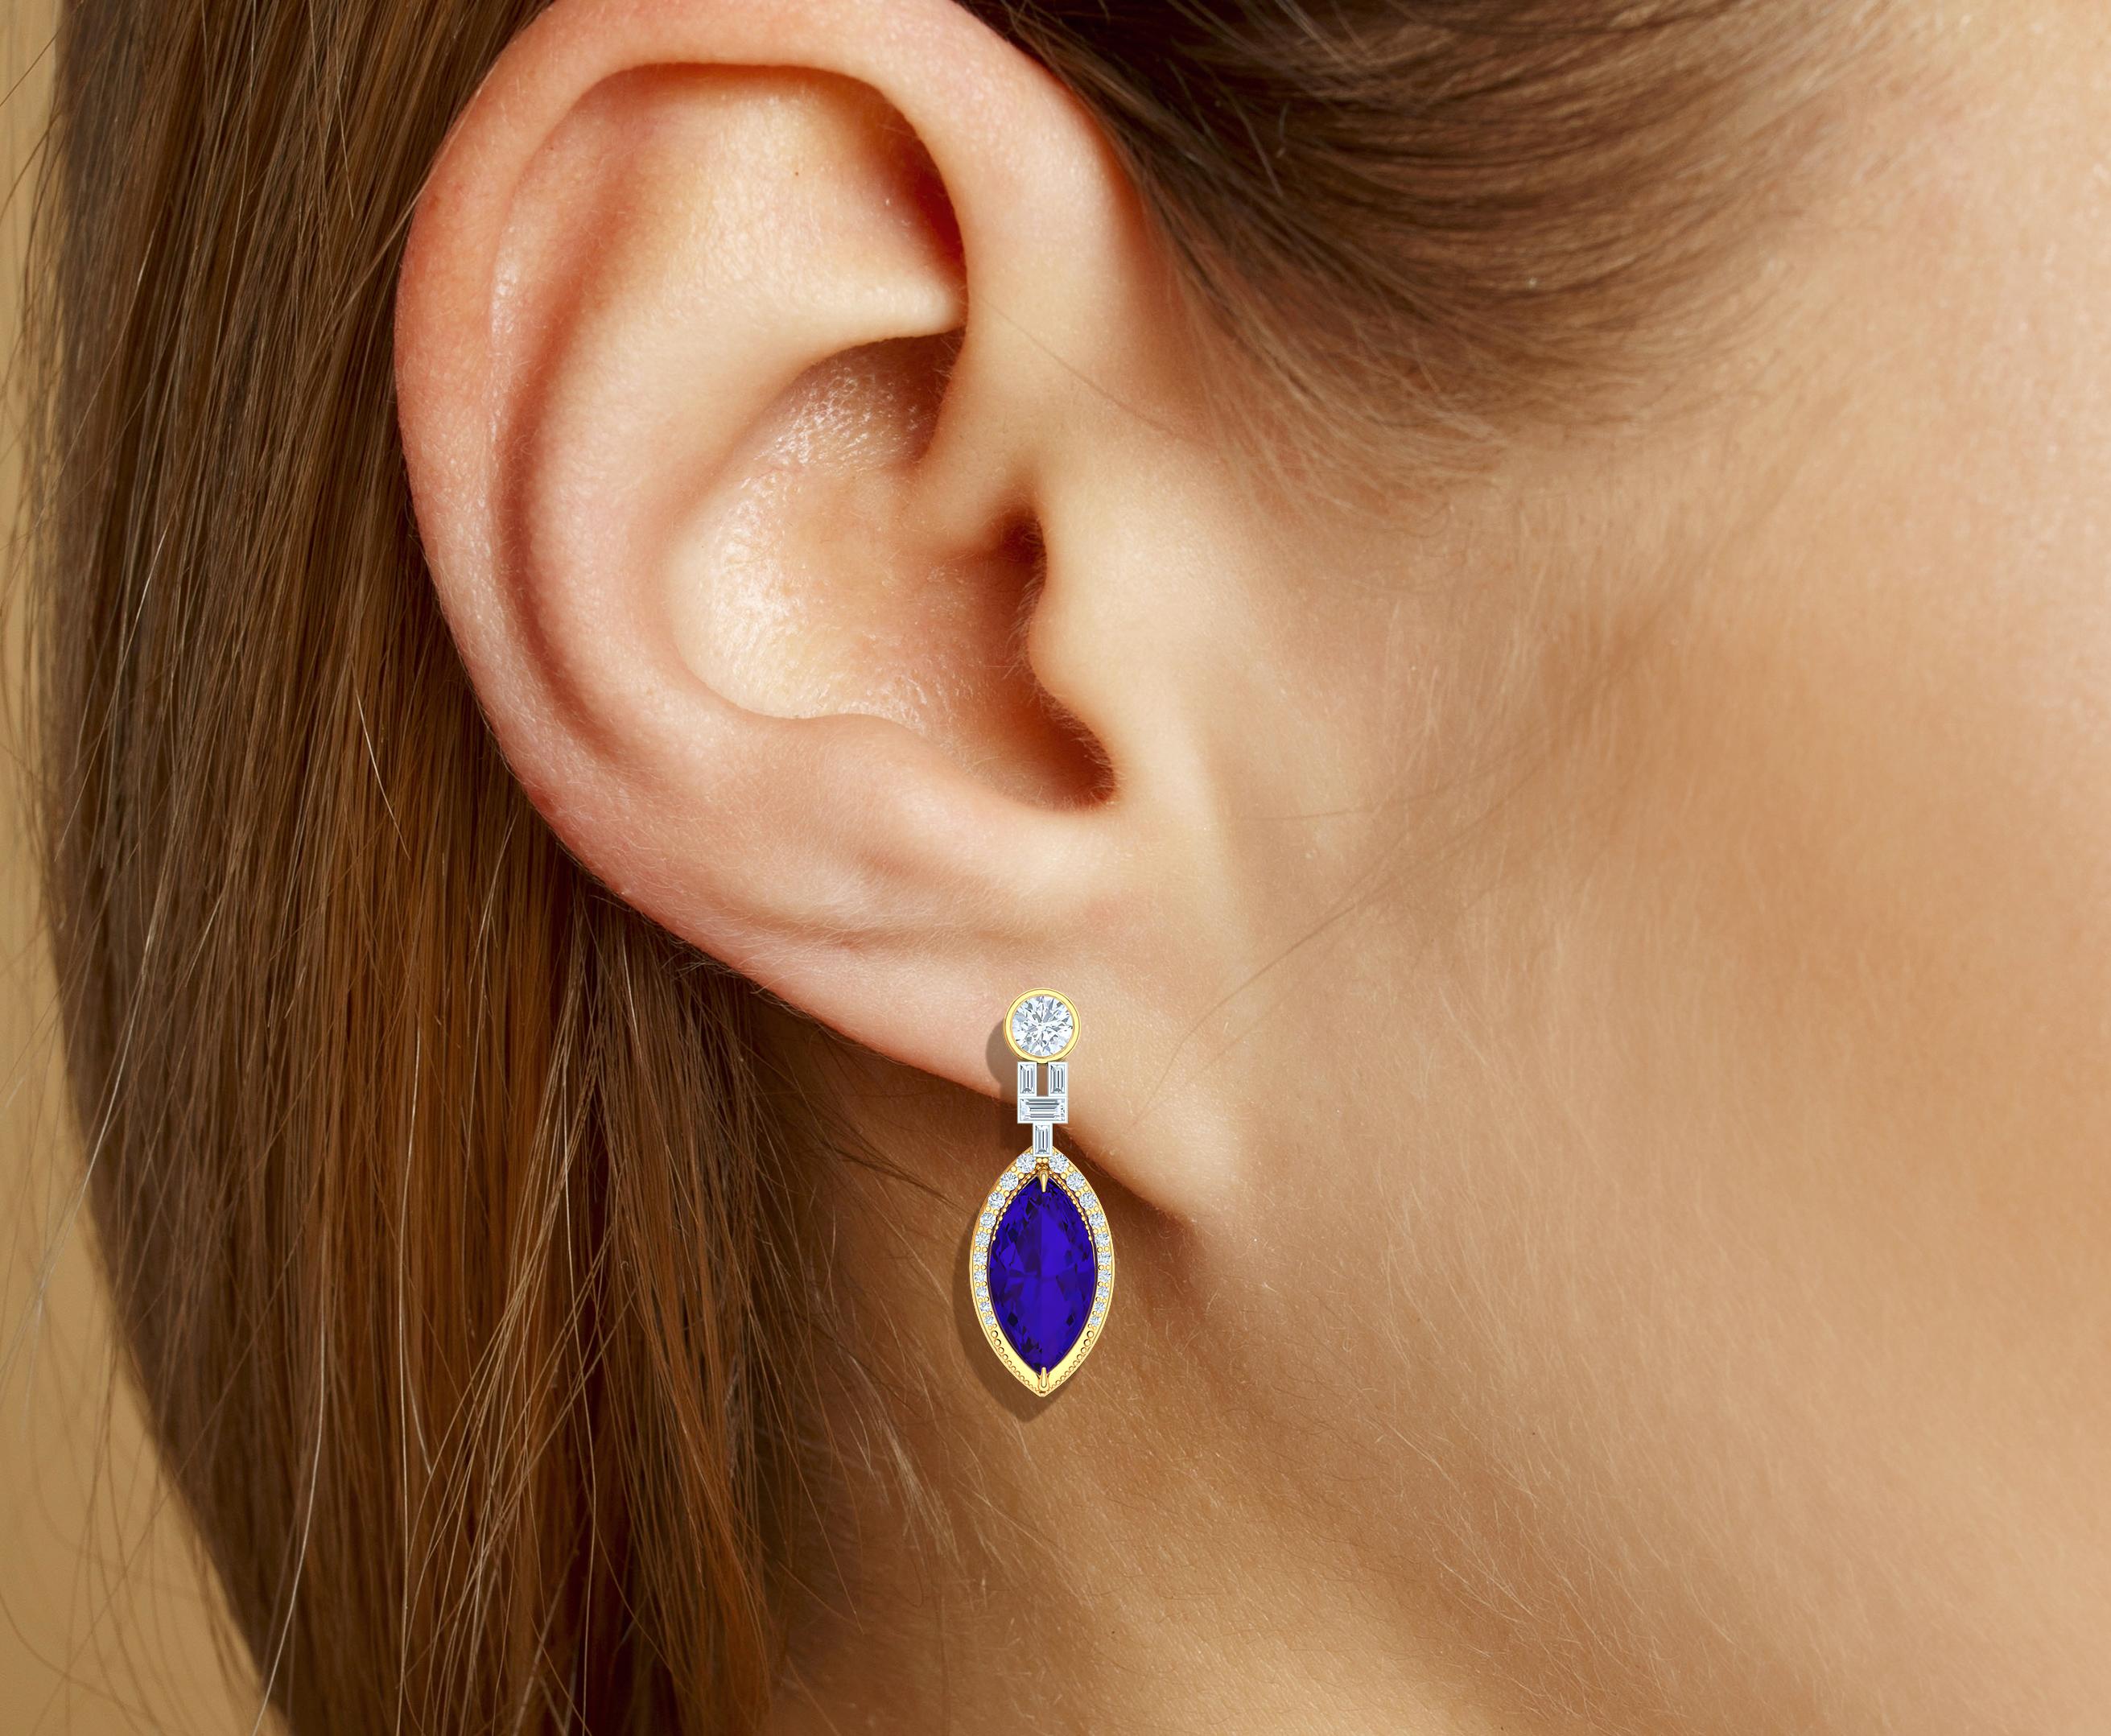 These stunning rich purple are of the finest quality Tanzanite in the world.  These earrings feature two matching rare marquise cut Tanzanite a shape not often cut and therefore very rare.  The color stunning!  The color is a rich violet purple blue